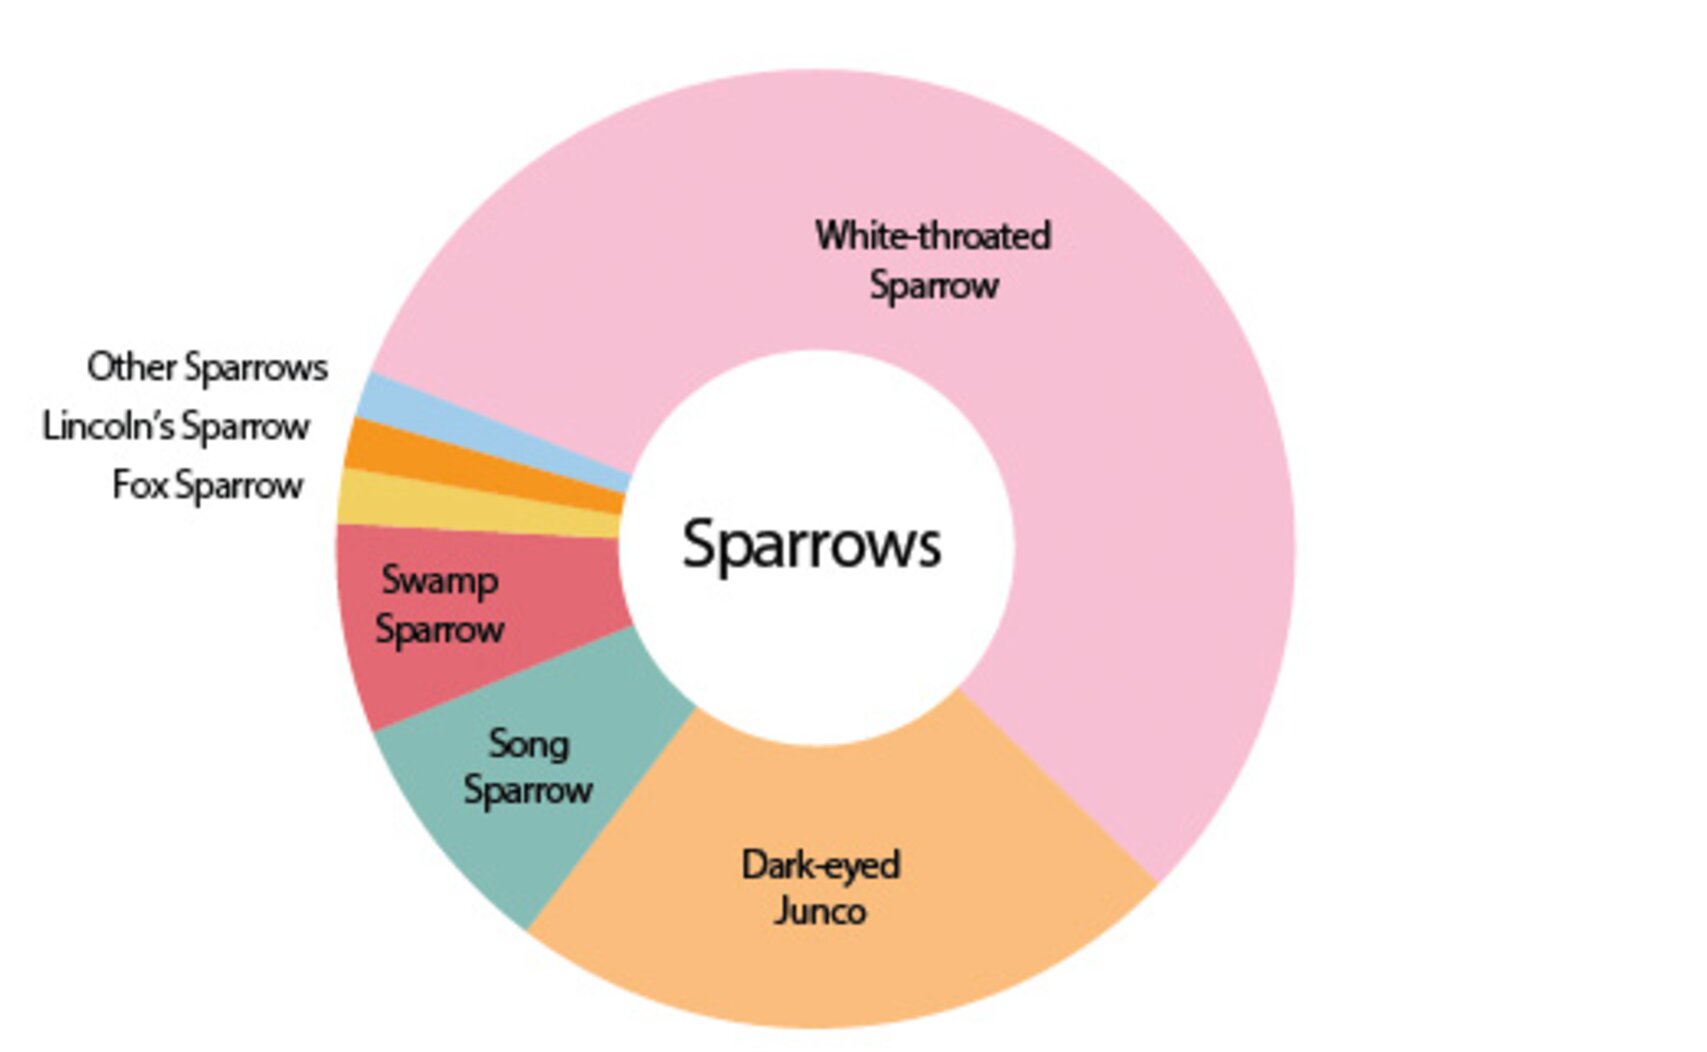 Sparrow collision victims in New York City since 1997, by species. Graphic: NYC Audubon